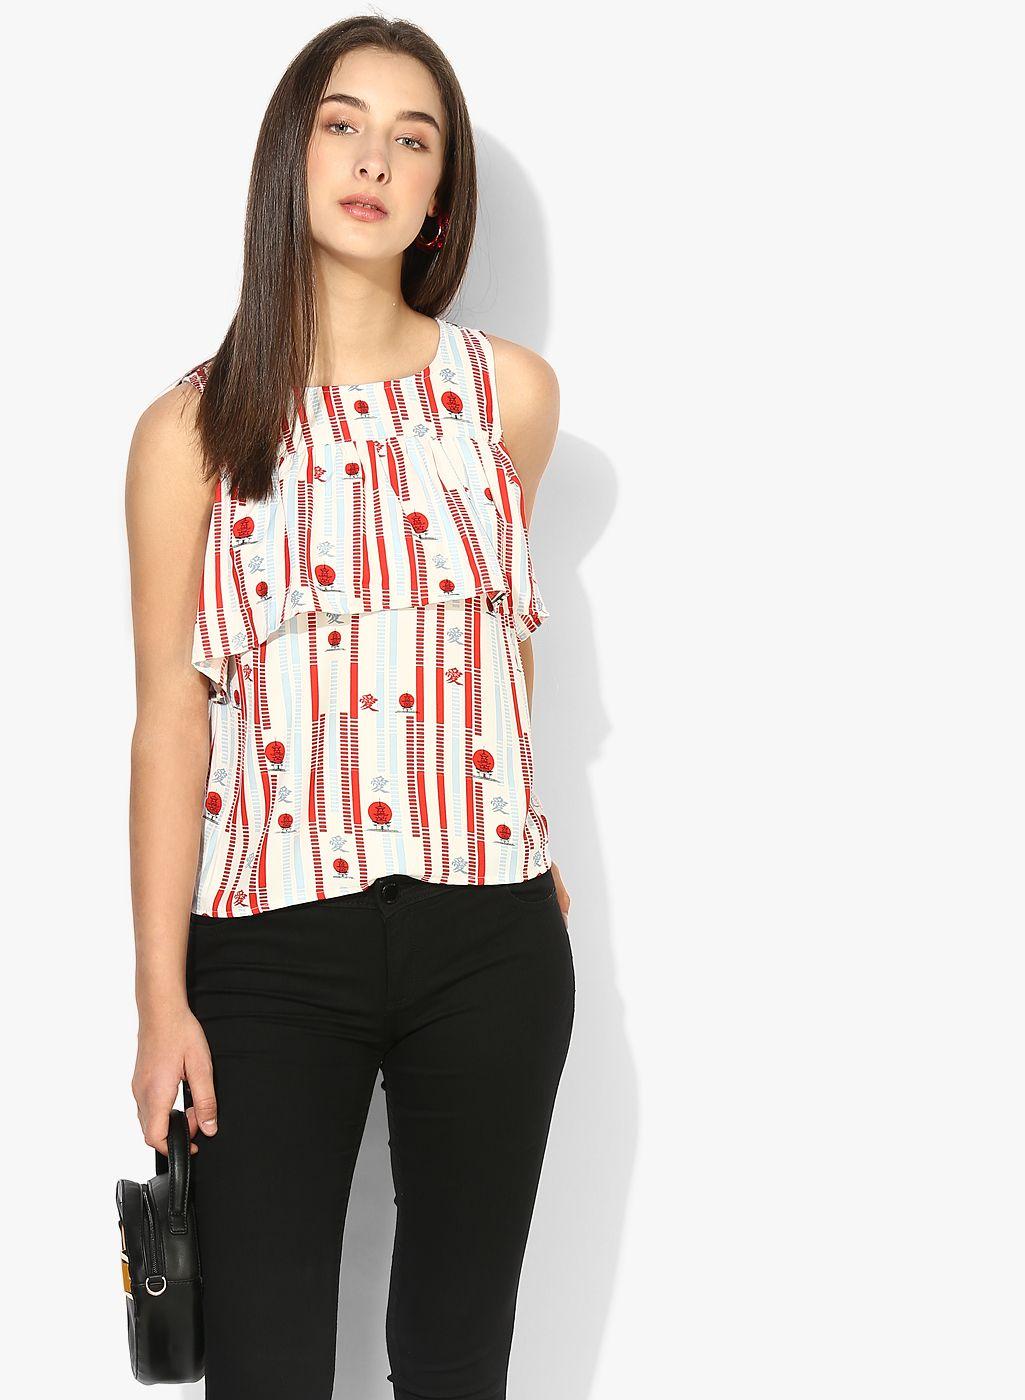 honey-by-pantaloons-women-off-white-printed-top